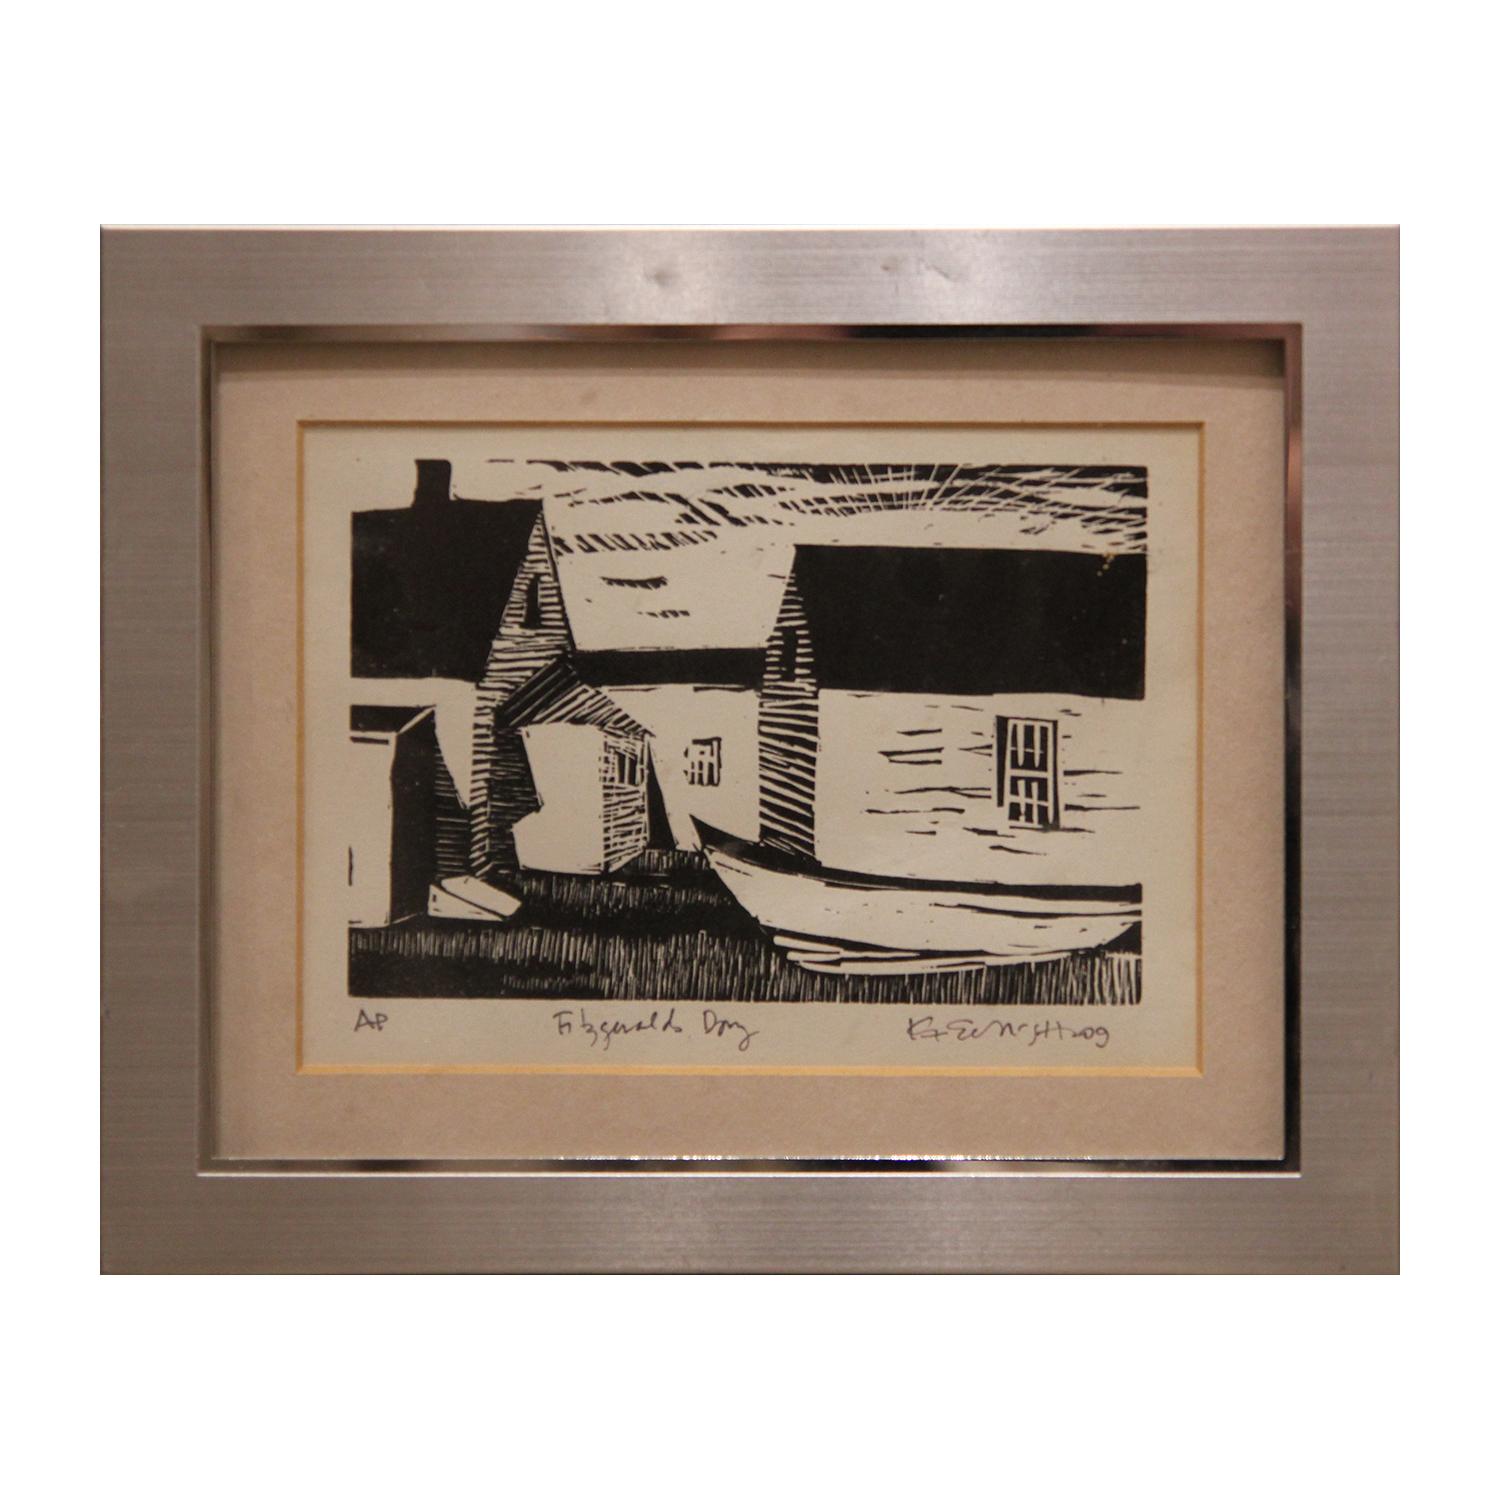 Fitzgerald Figurative Print - Boat with Houses Landscape Woodblock Print (Possibly Woodstock School of Art)